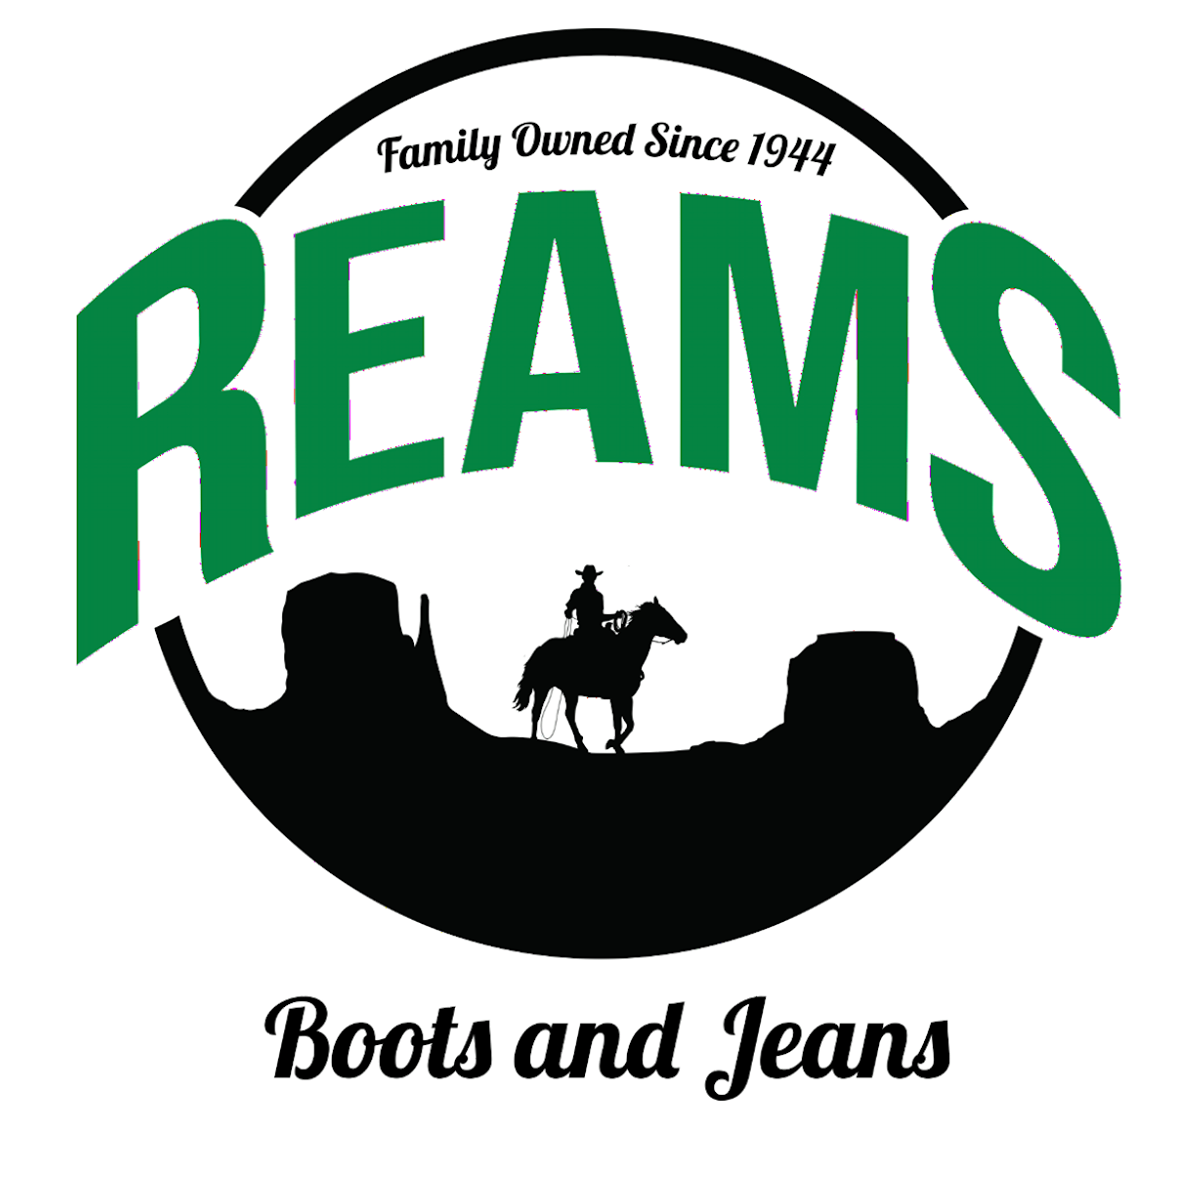 Company logo of Reams Boots and Jeans